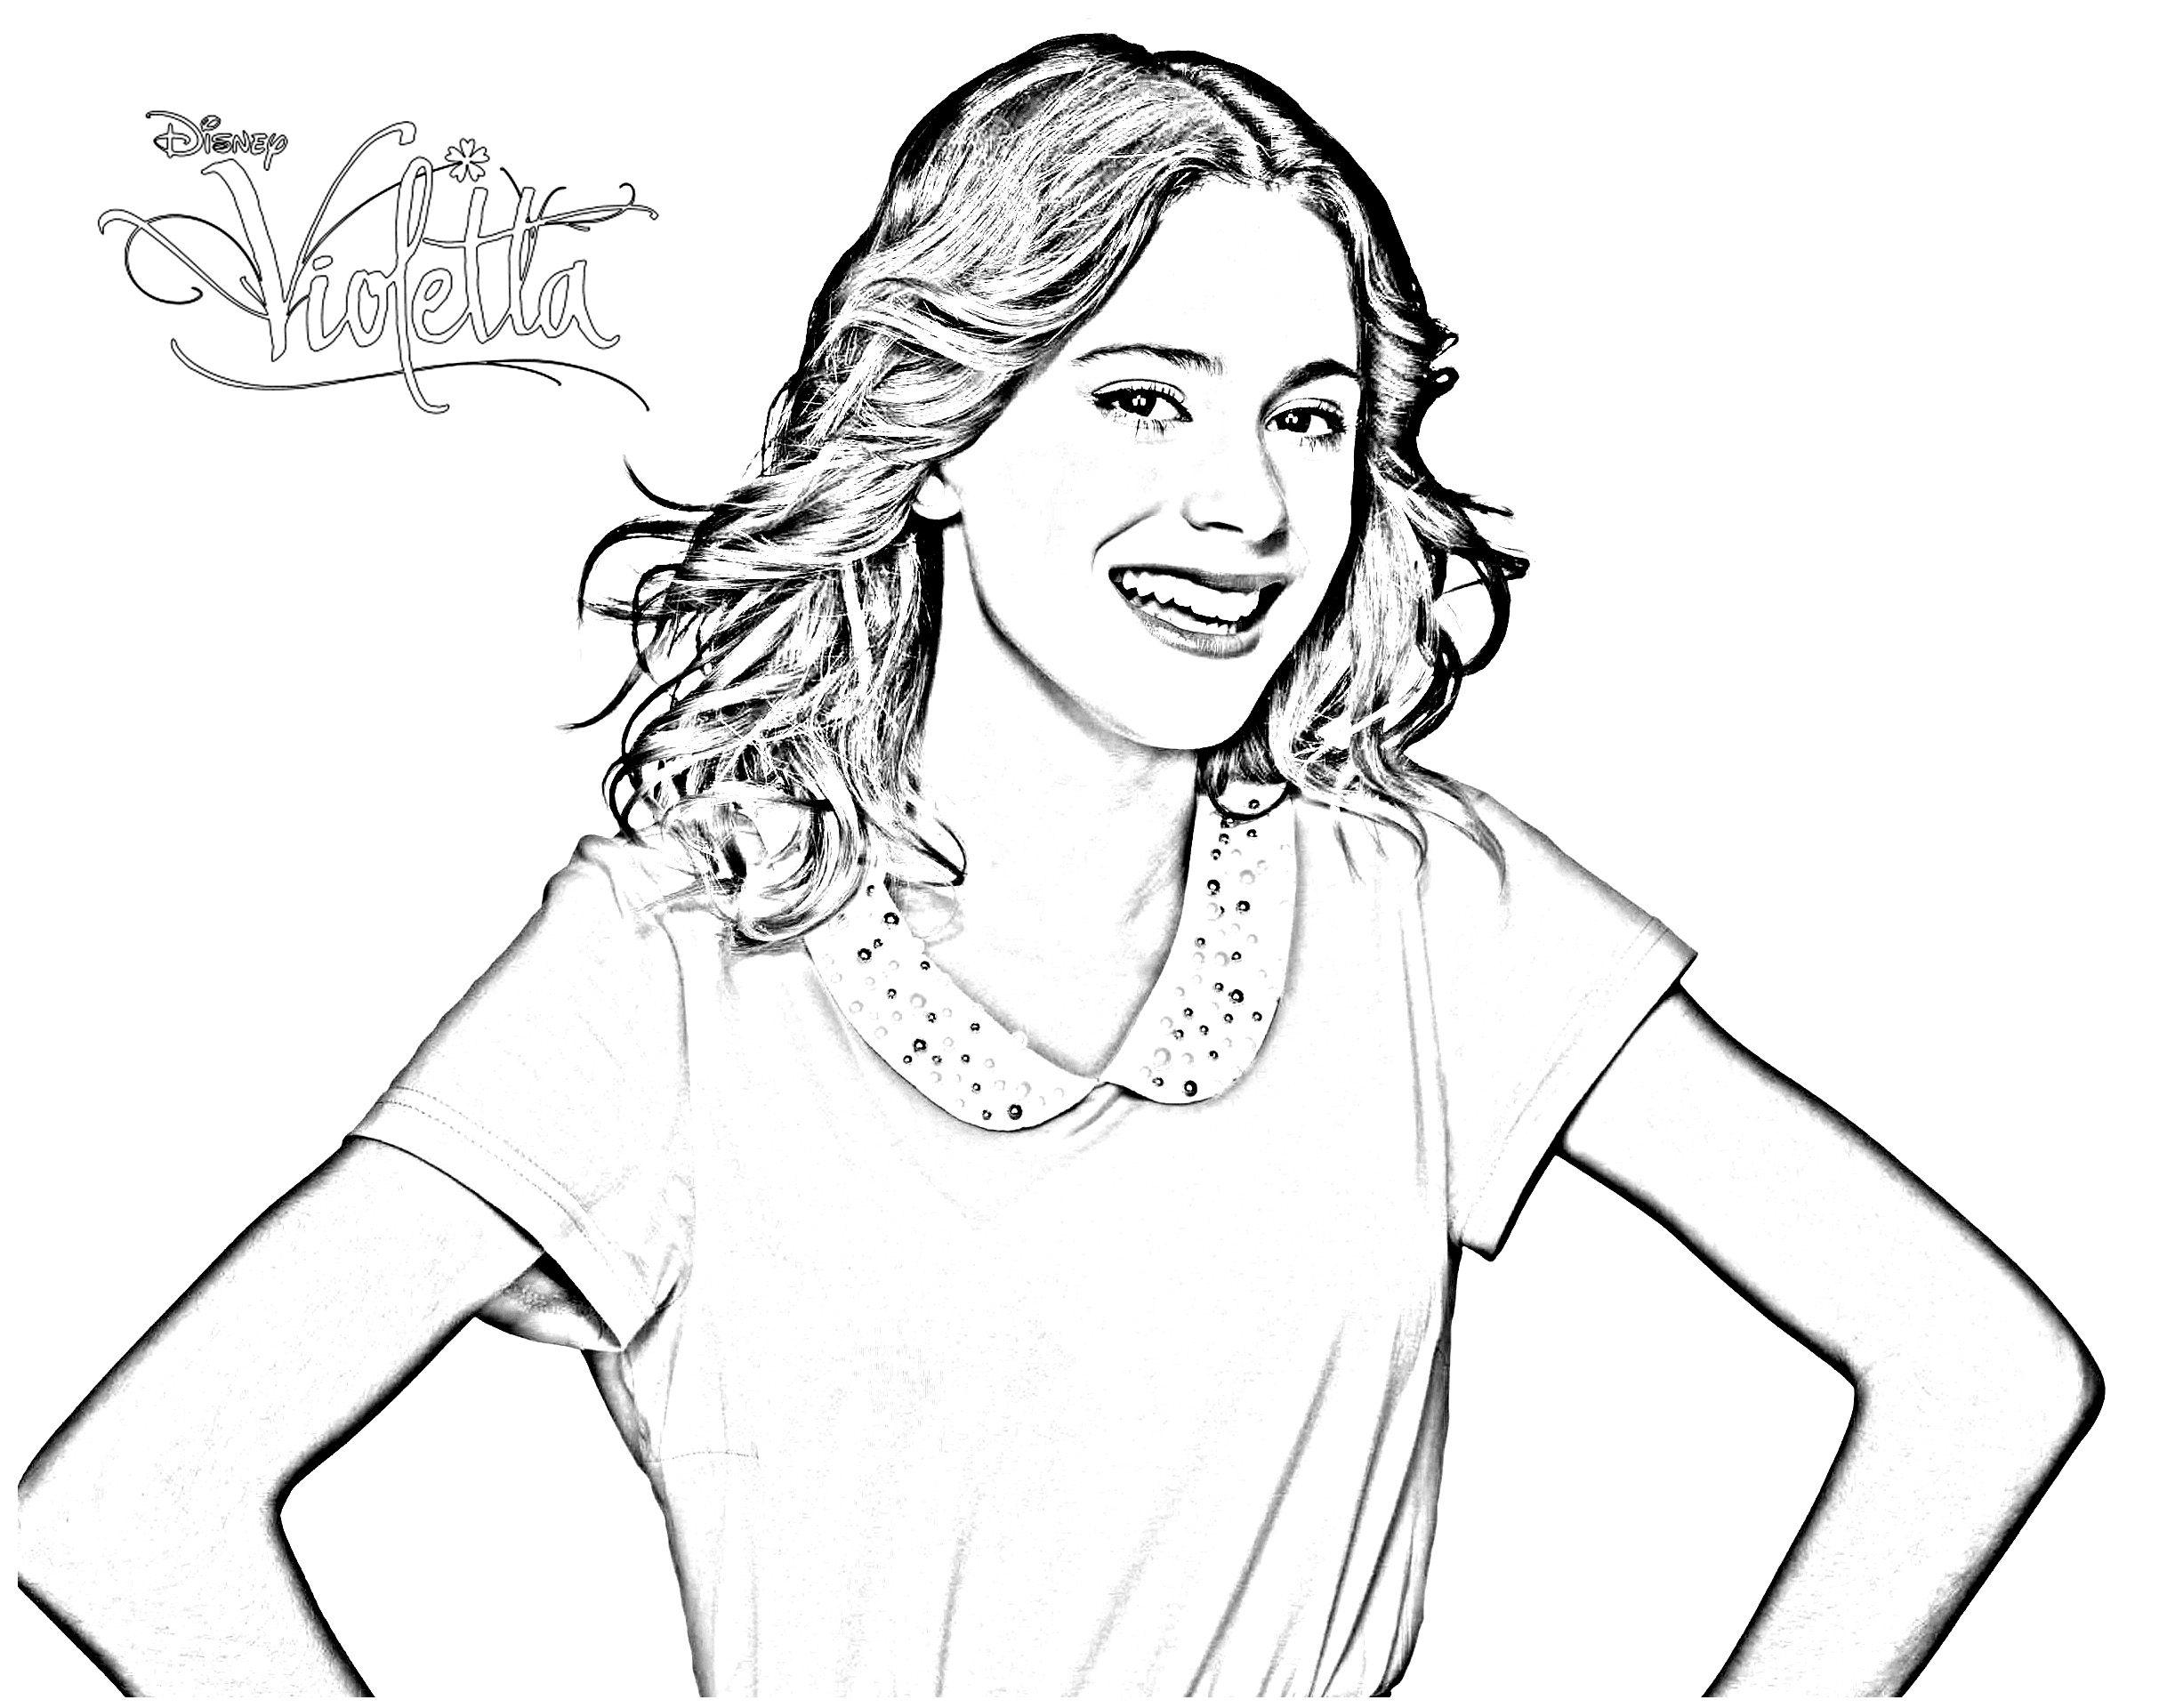 Violetta coloring page to print and color